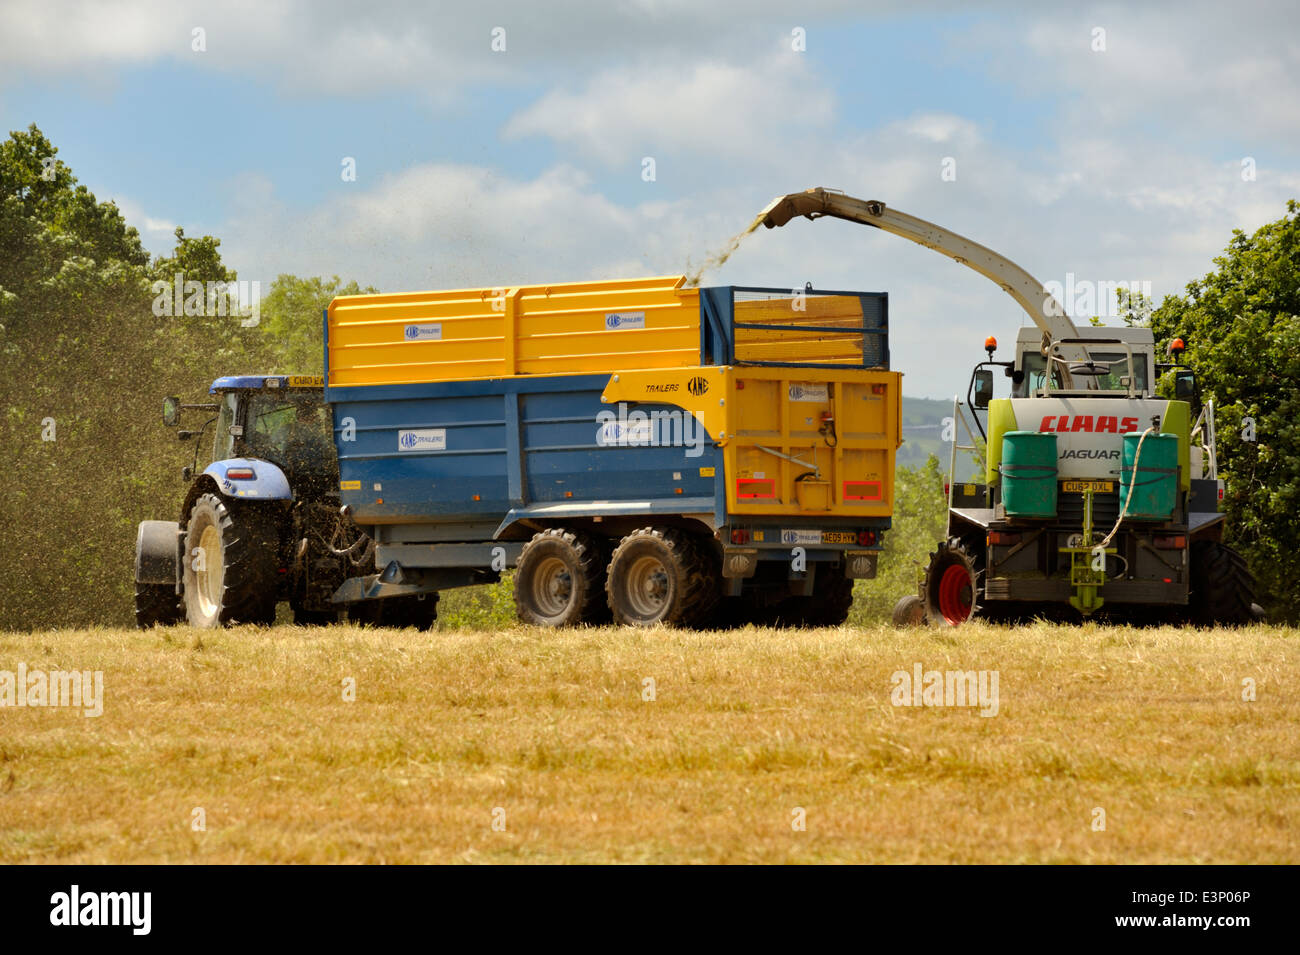 Tractor pulled trailer being filled by cut grass for silage making by forage harvester Stock Photo